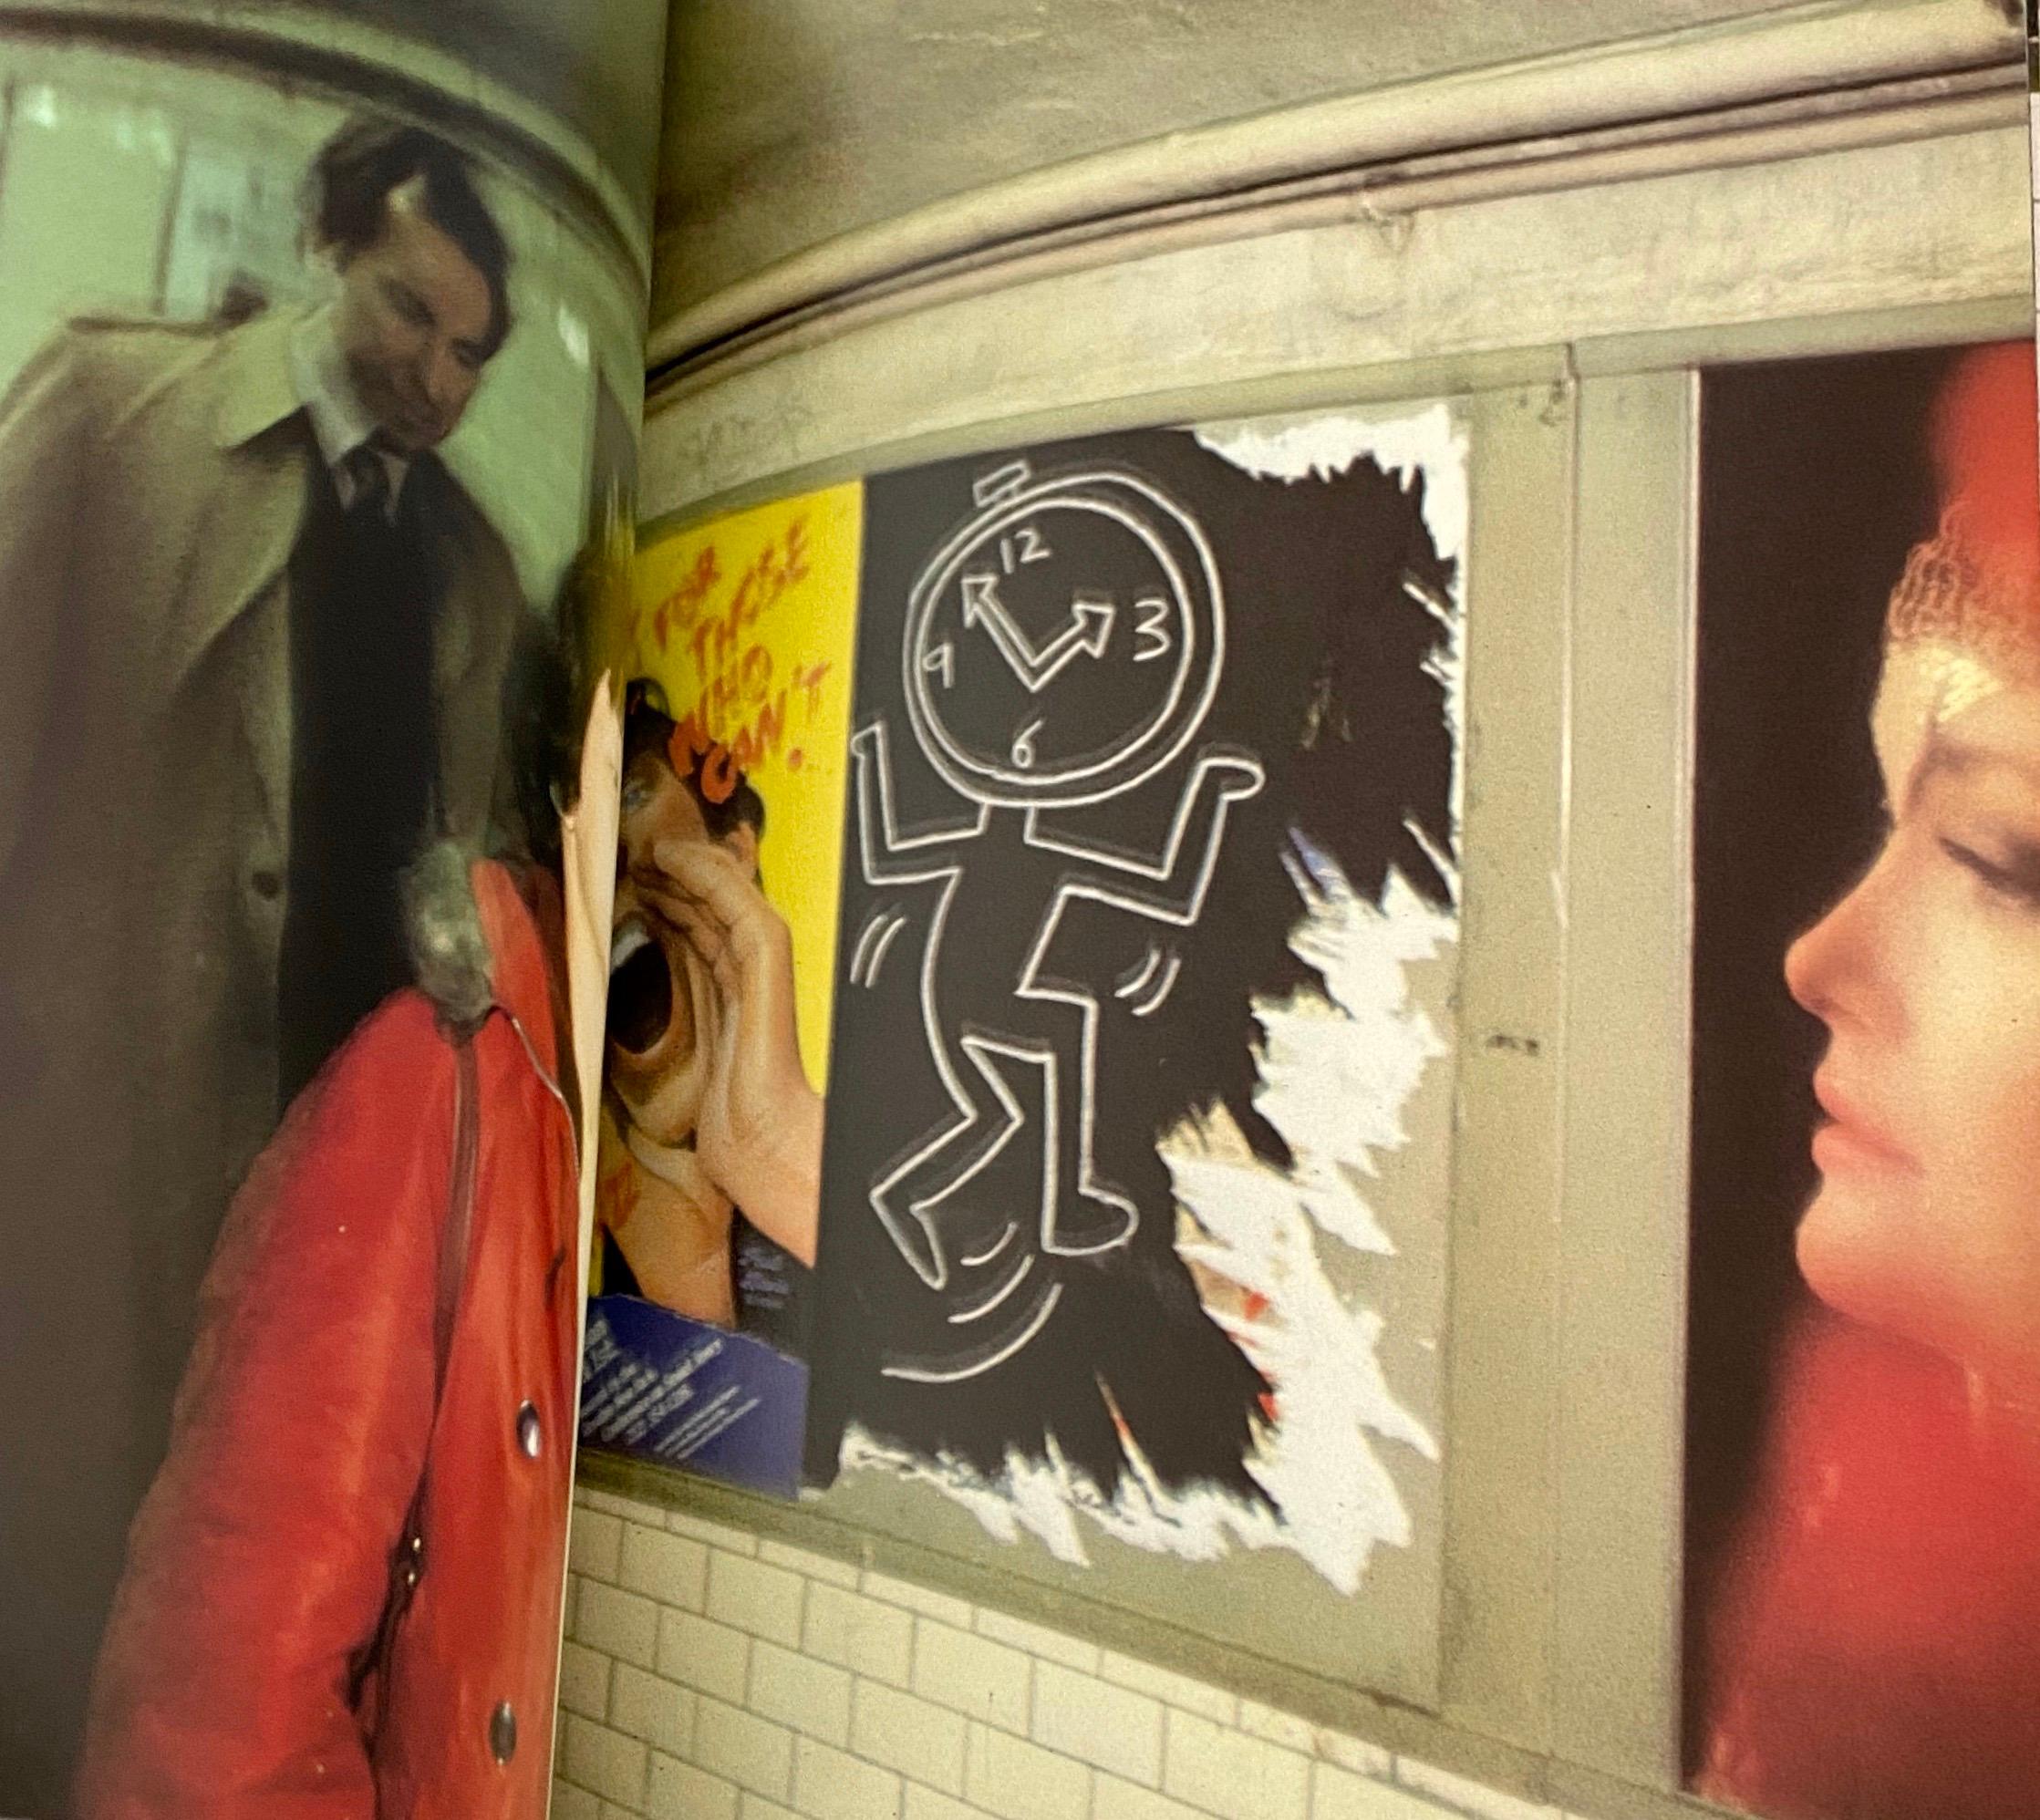 Keith Haring 1984:
Keith Haring, Art in Transit: Subway Drawings with Photos by Tseng Kwong Chi:

This highly collectible & well preserved 1984 Keith Haring monograph examines them much historic & seminal chalk drawings done by Keith Haring on blank